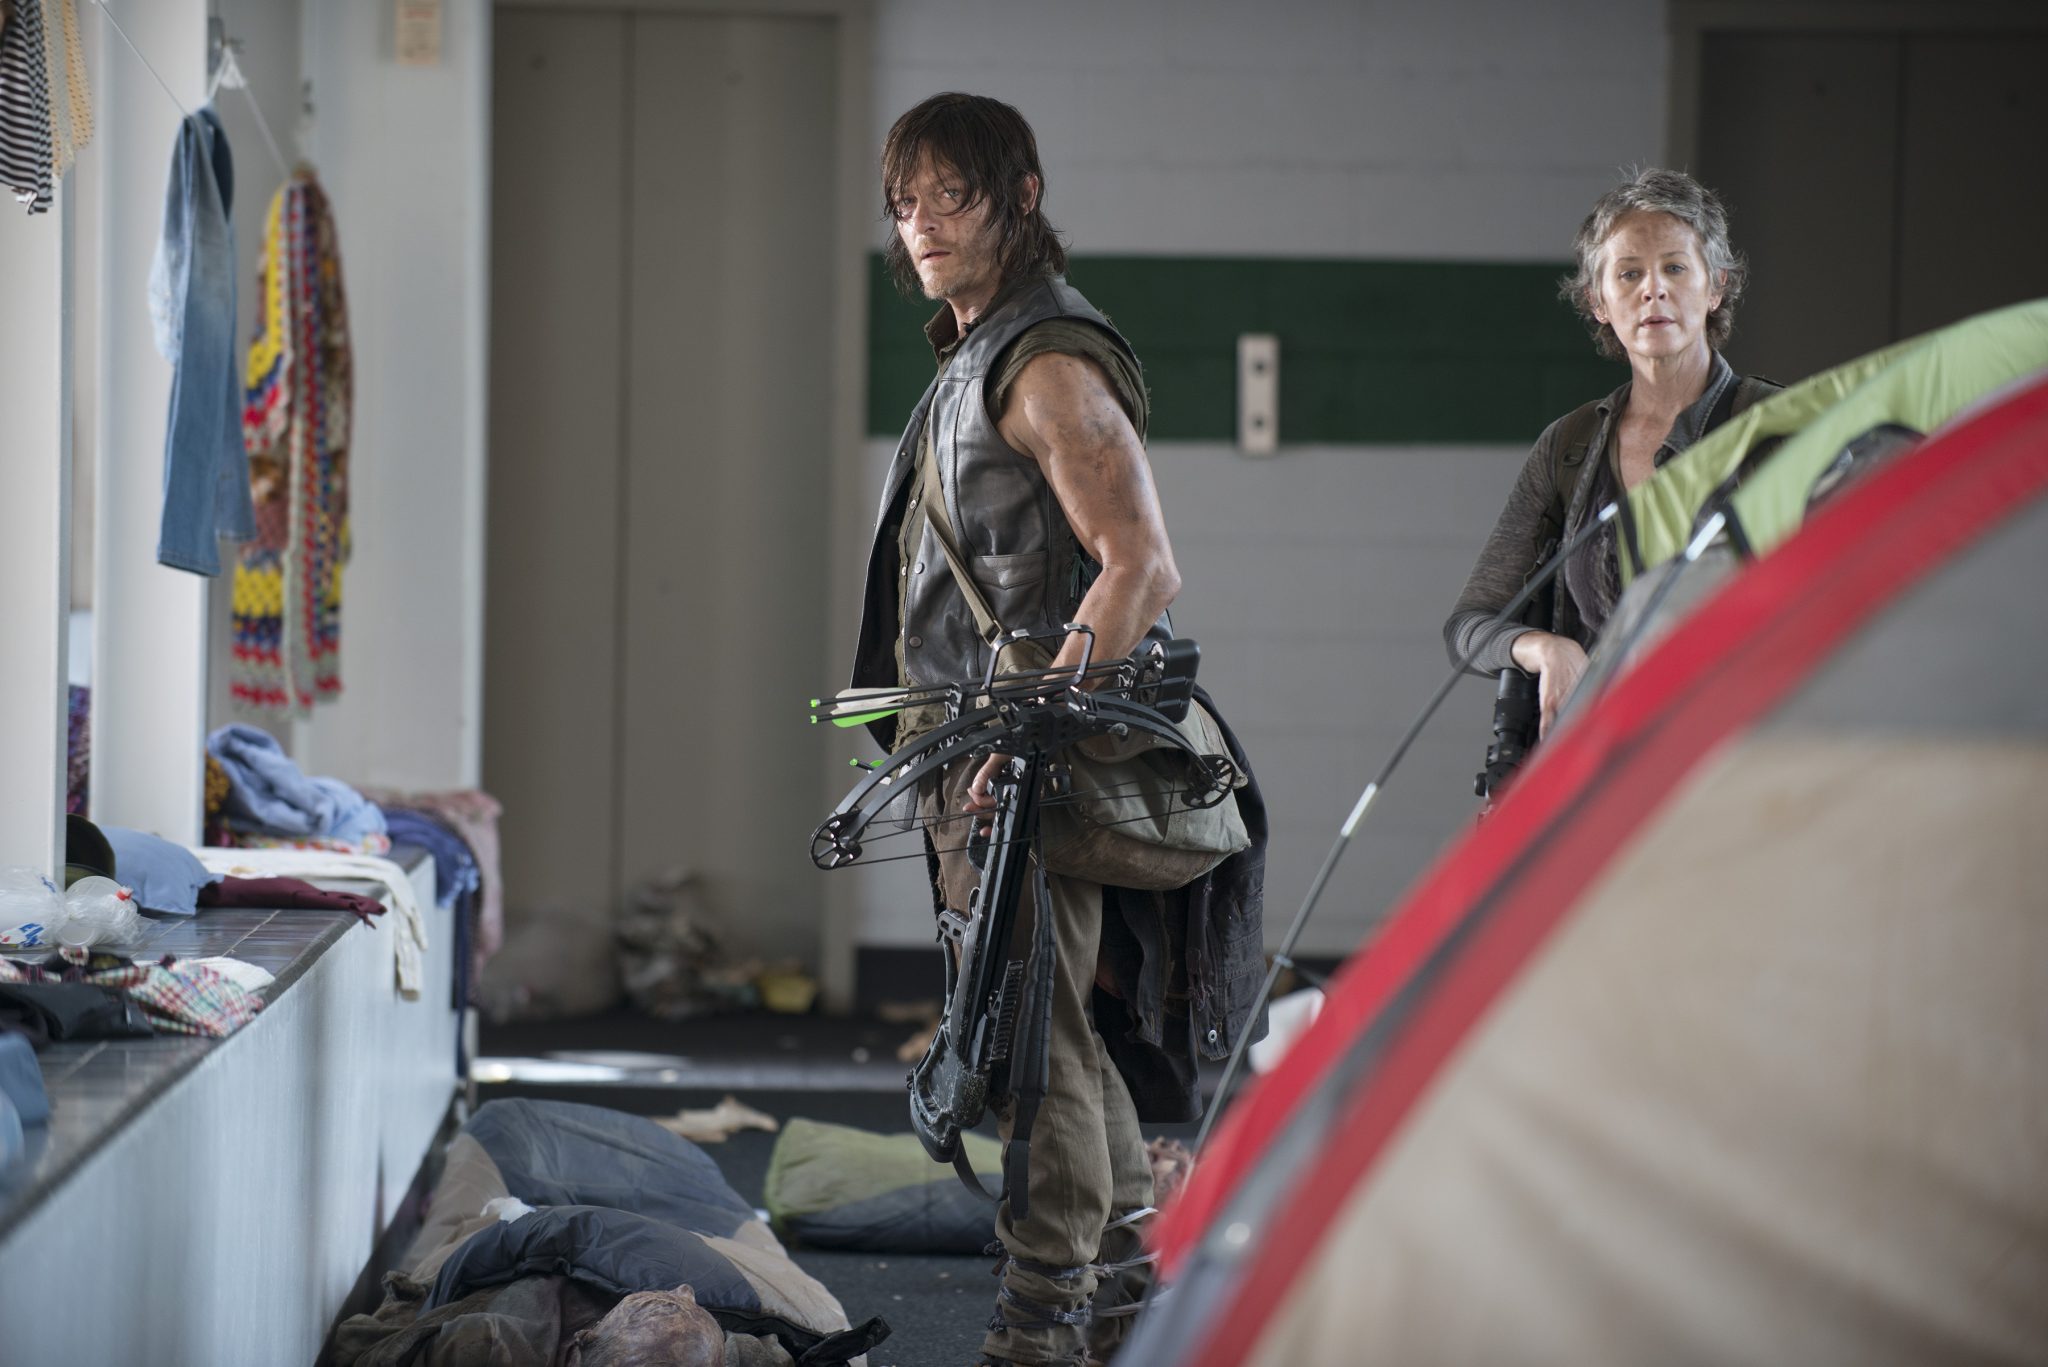 Walking Dead Daryl and Carol encounter zombies in tents. Photo: Gene Page/AMC